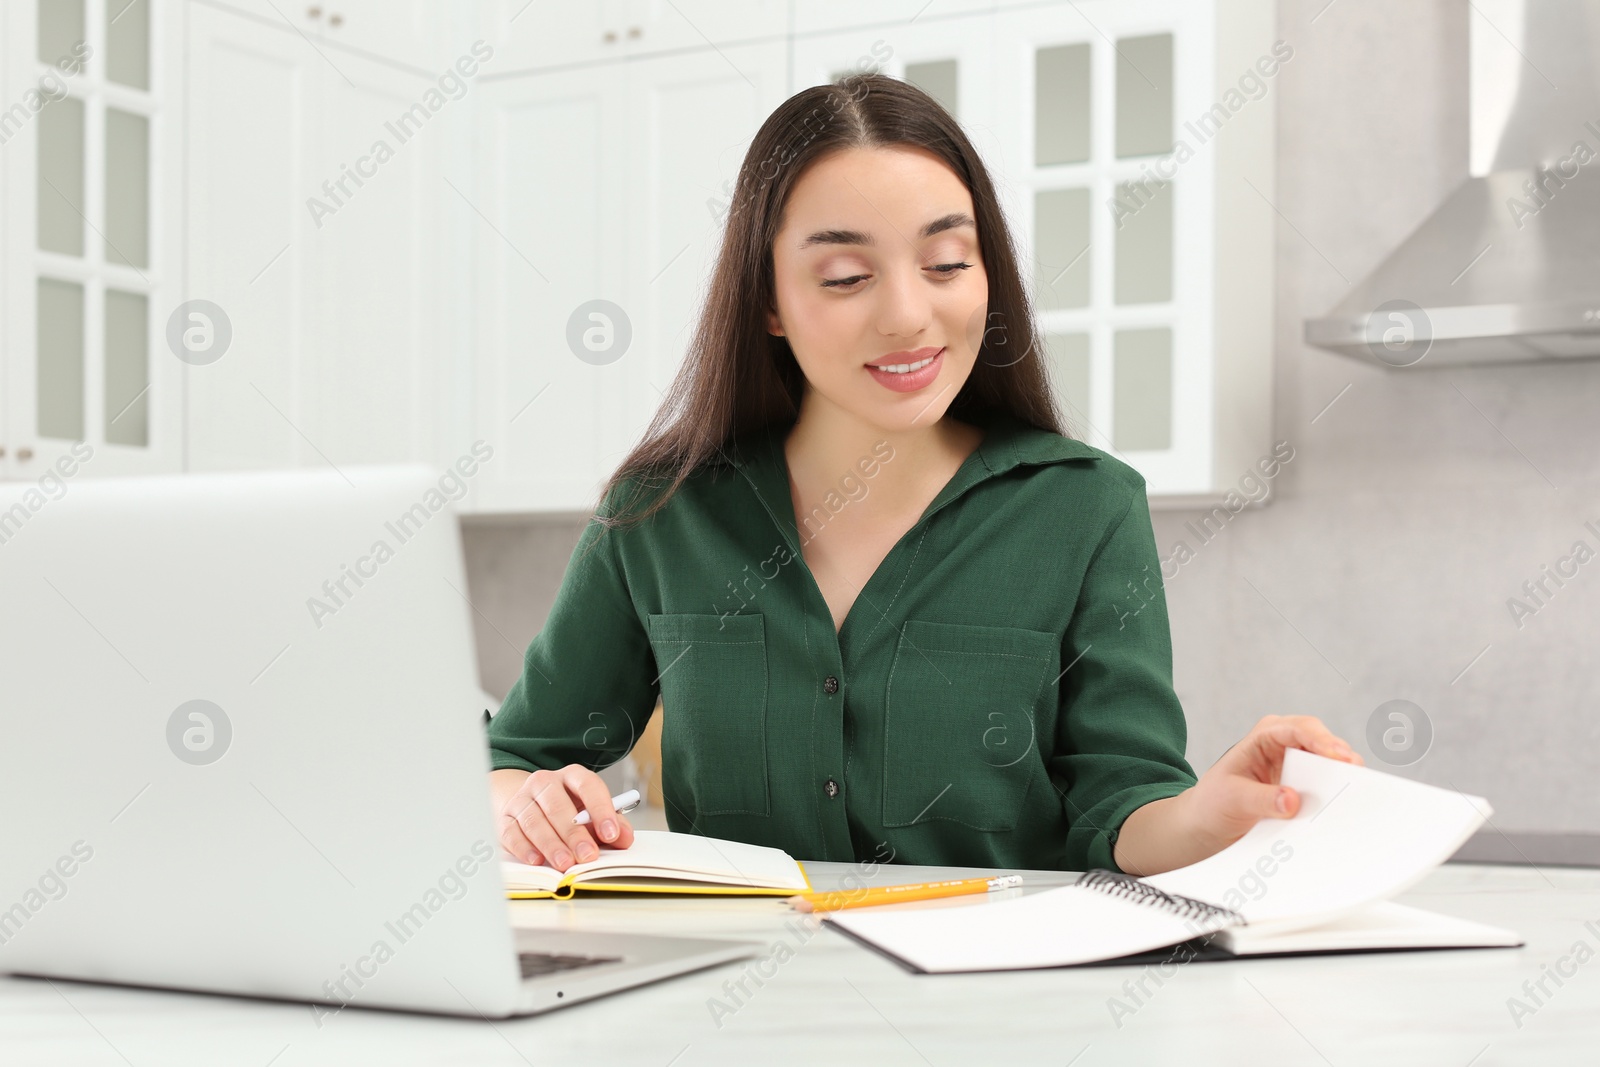 Photo of Home workplace. Woman looking at notebook near laptop at marble desk in kitchen